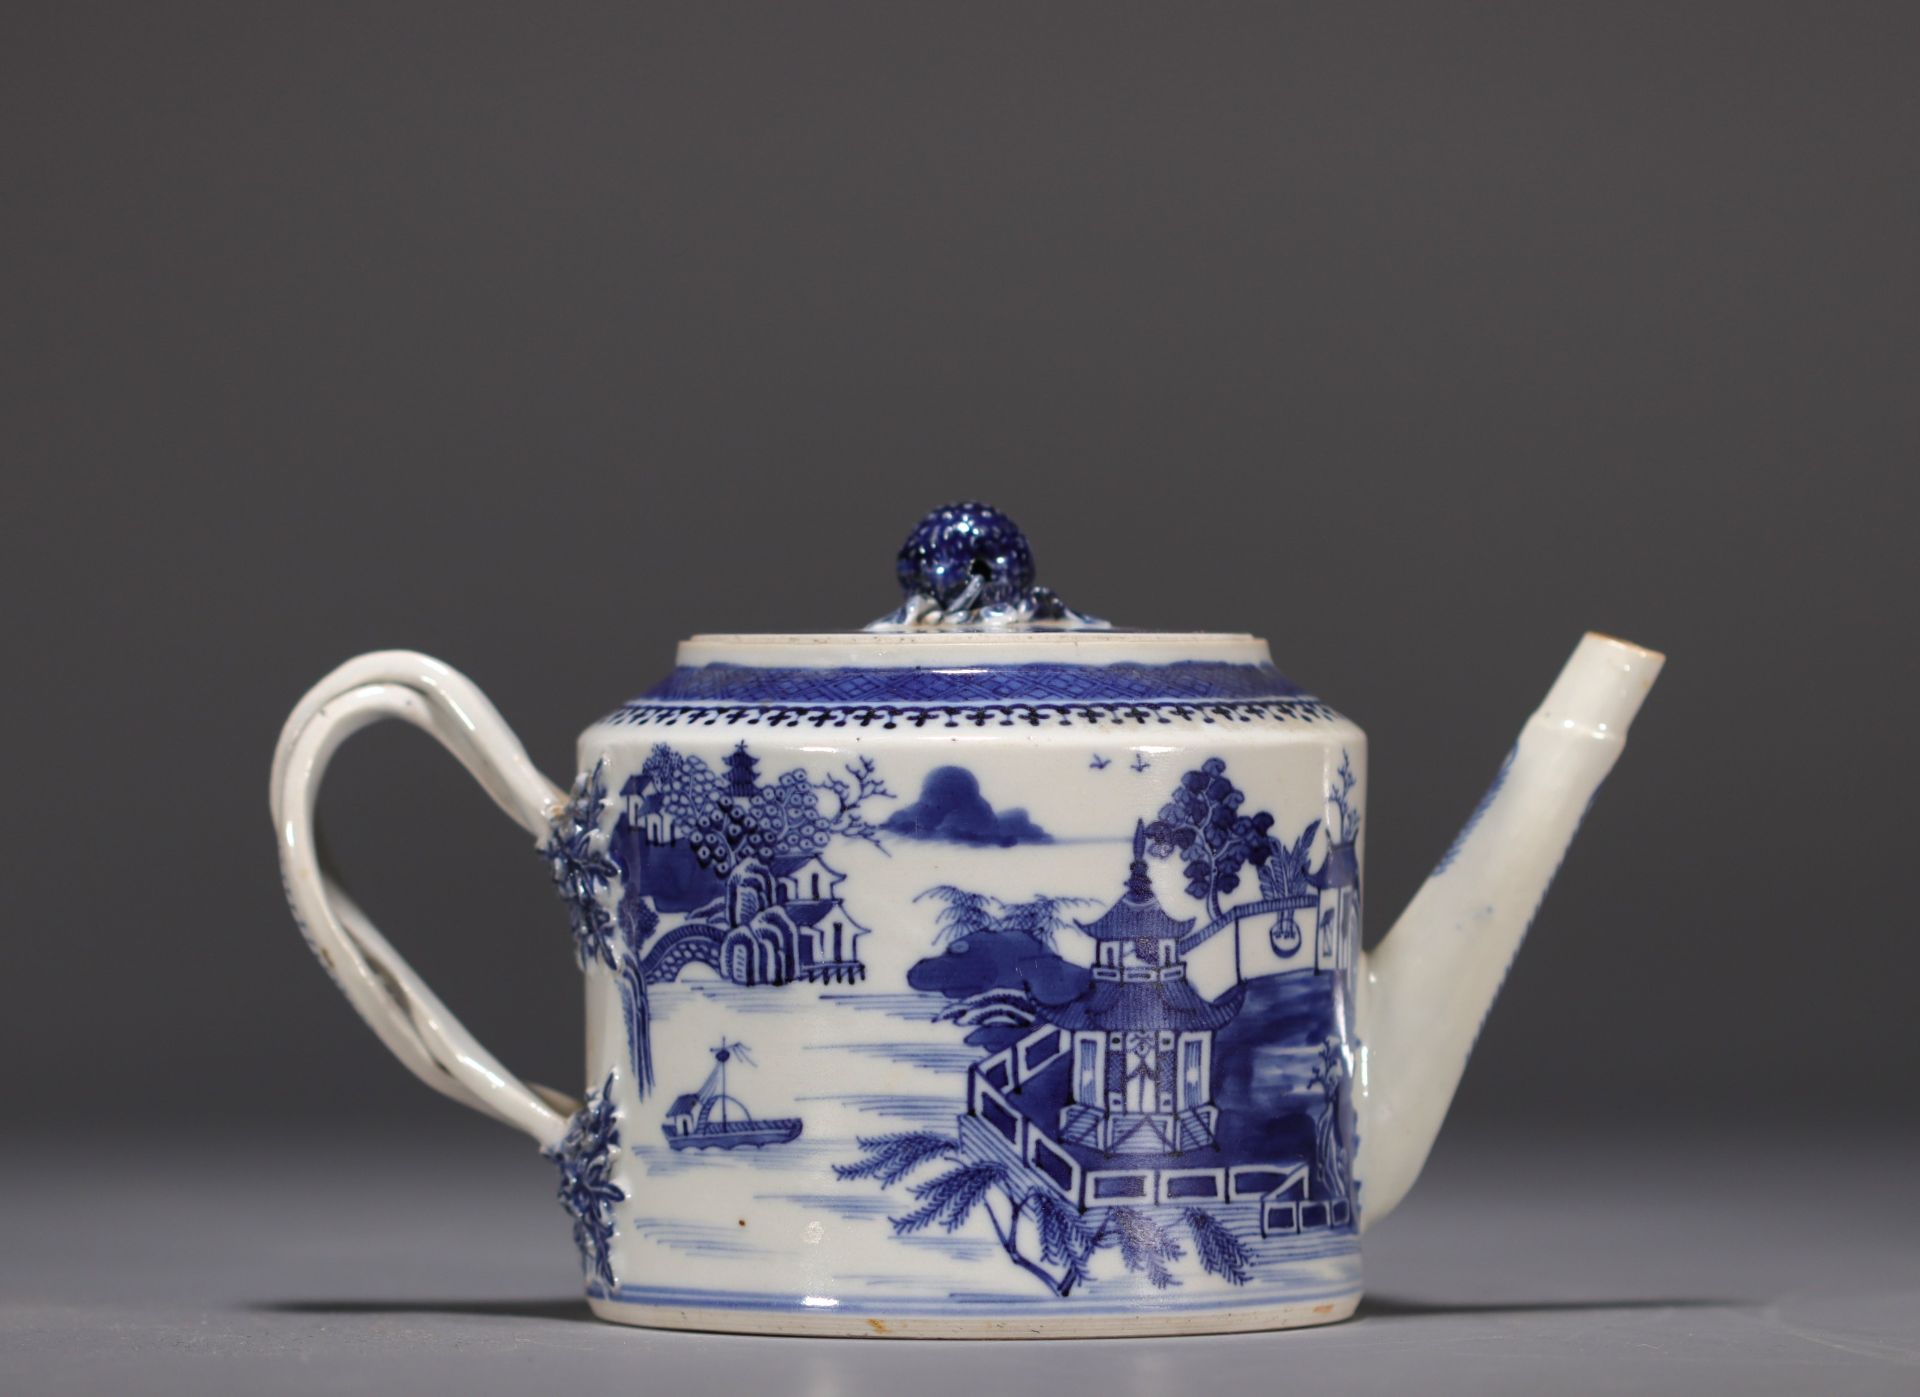 China - A white and blue porcelain teapot decorated with landscapes and a junk, 18th century.